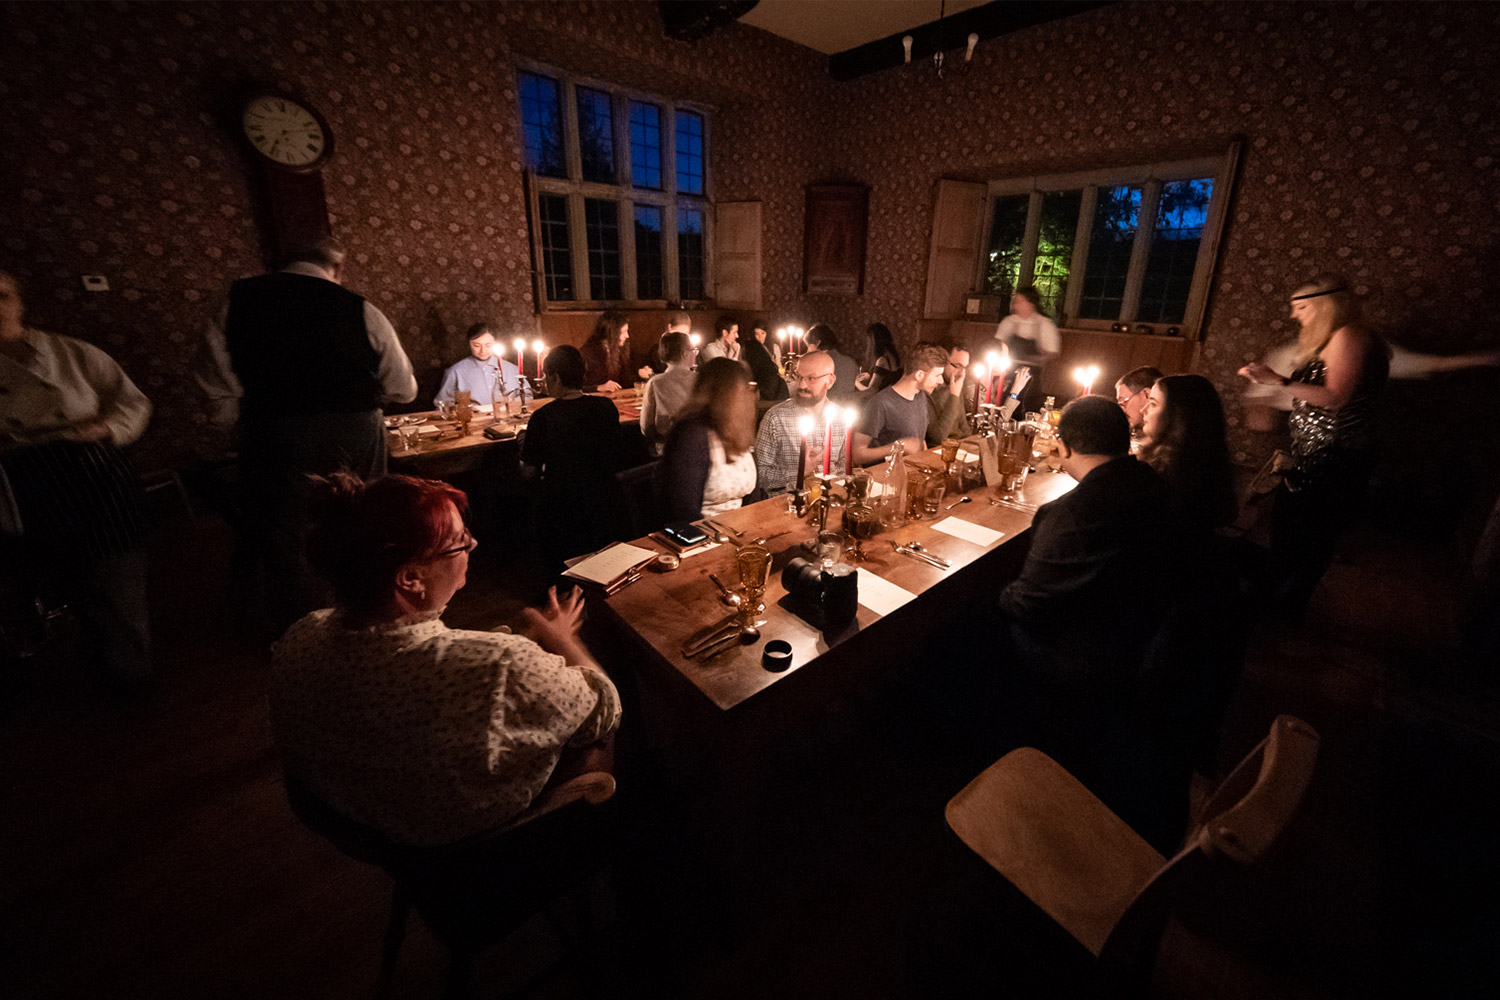 A wide view of two dinner tables full of people by candlelight